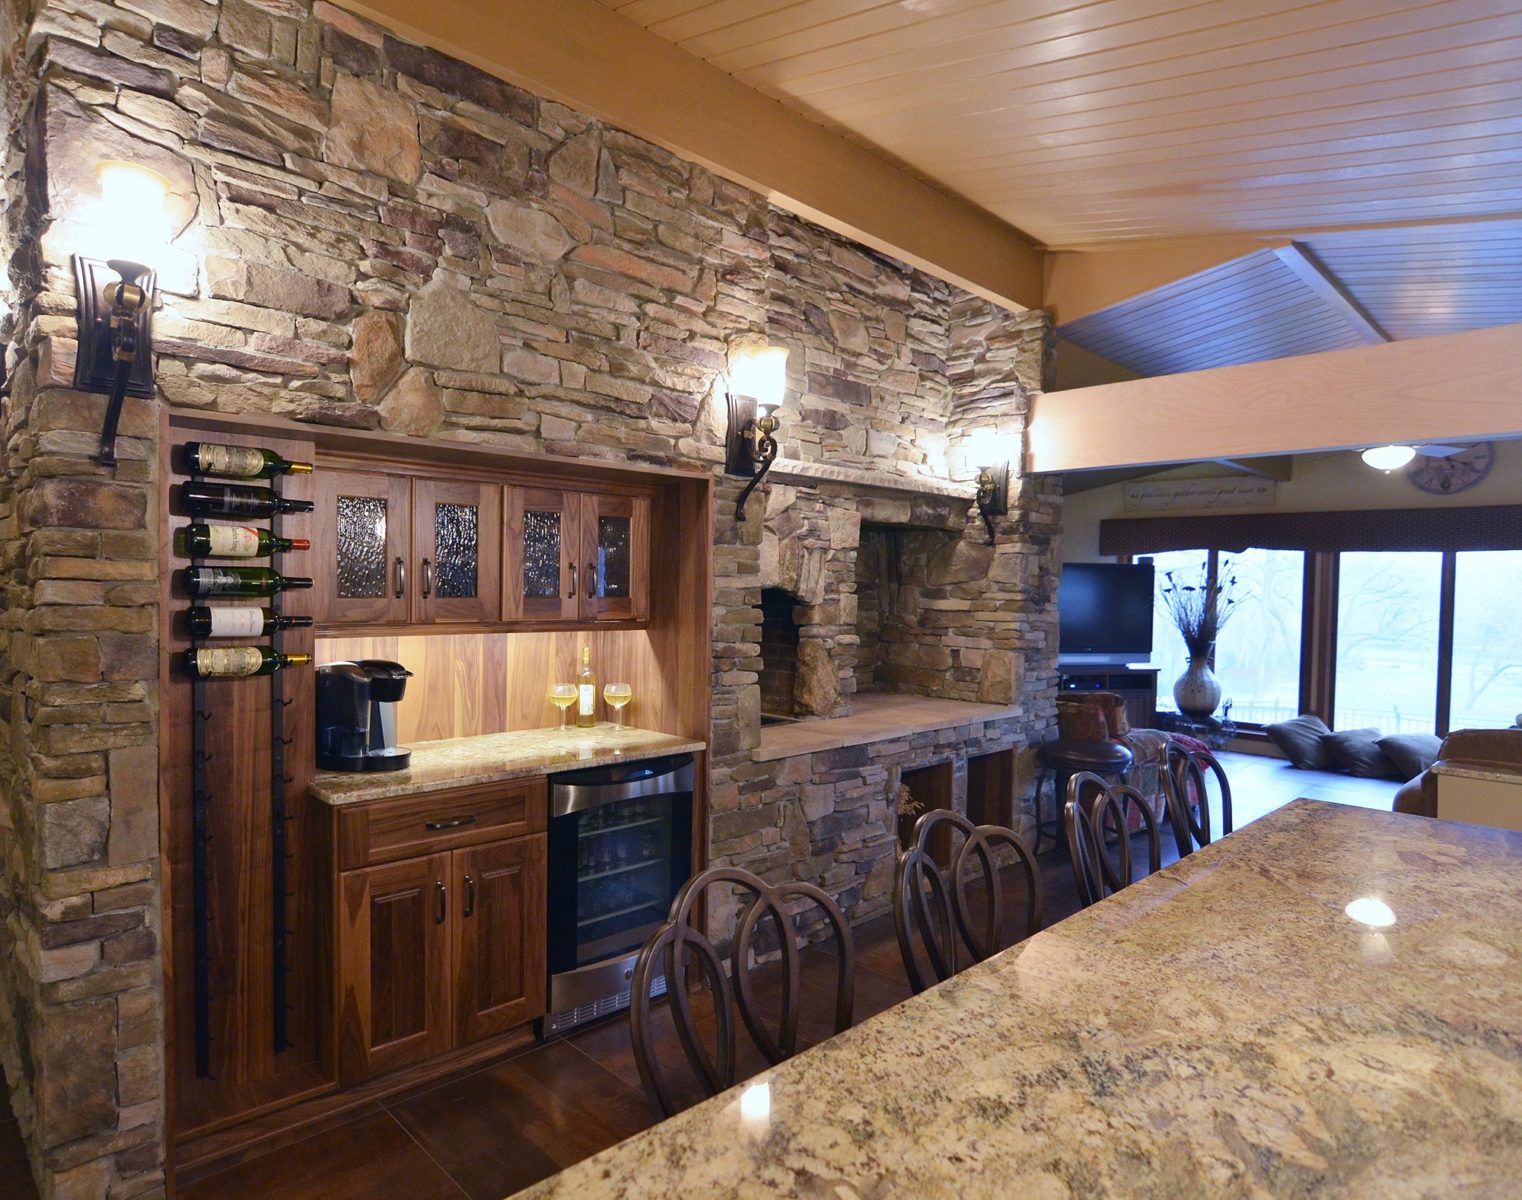 Kitchen with a stonework wall and stone oven, wine cooler, drawers, cabinets, and small countertop